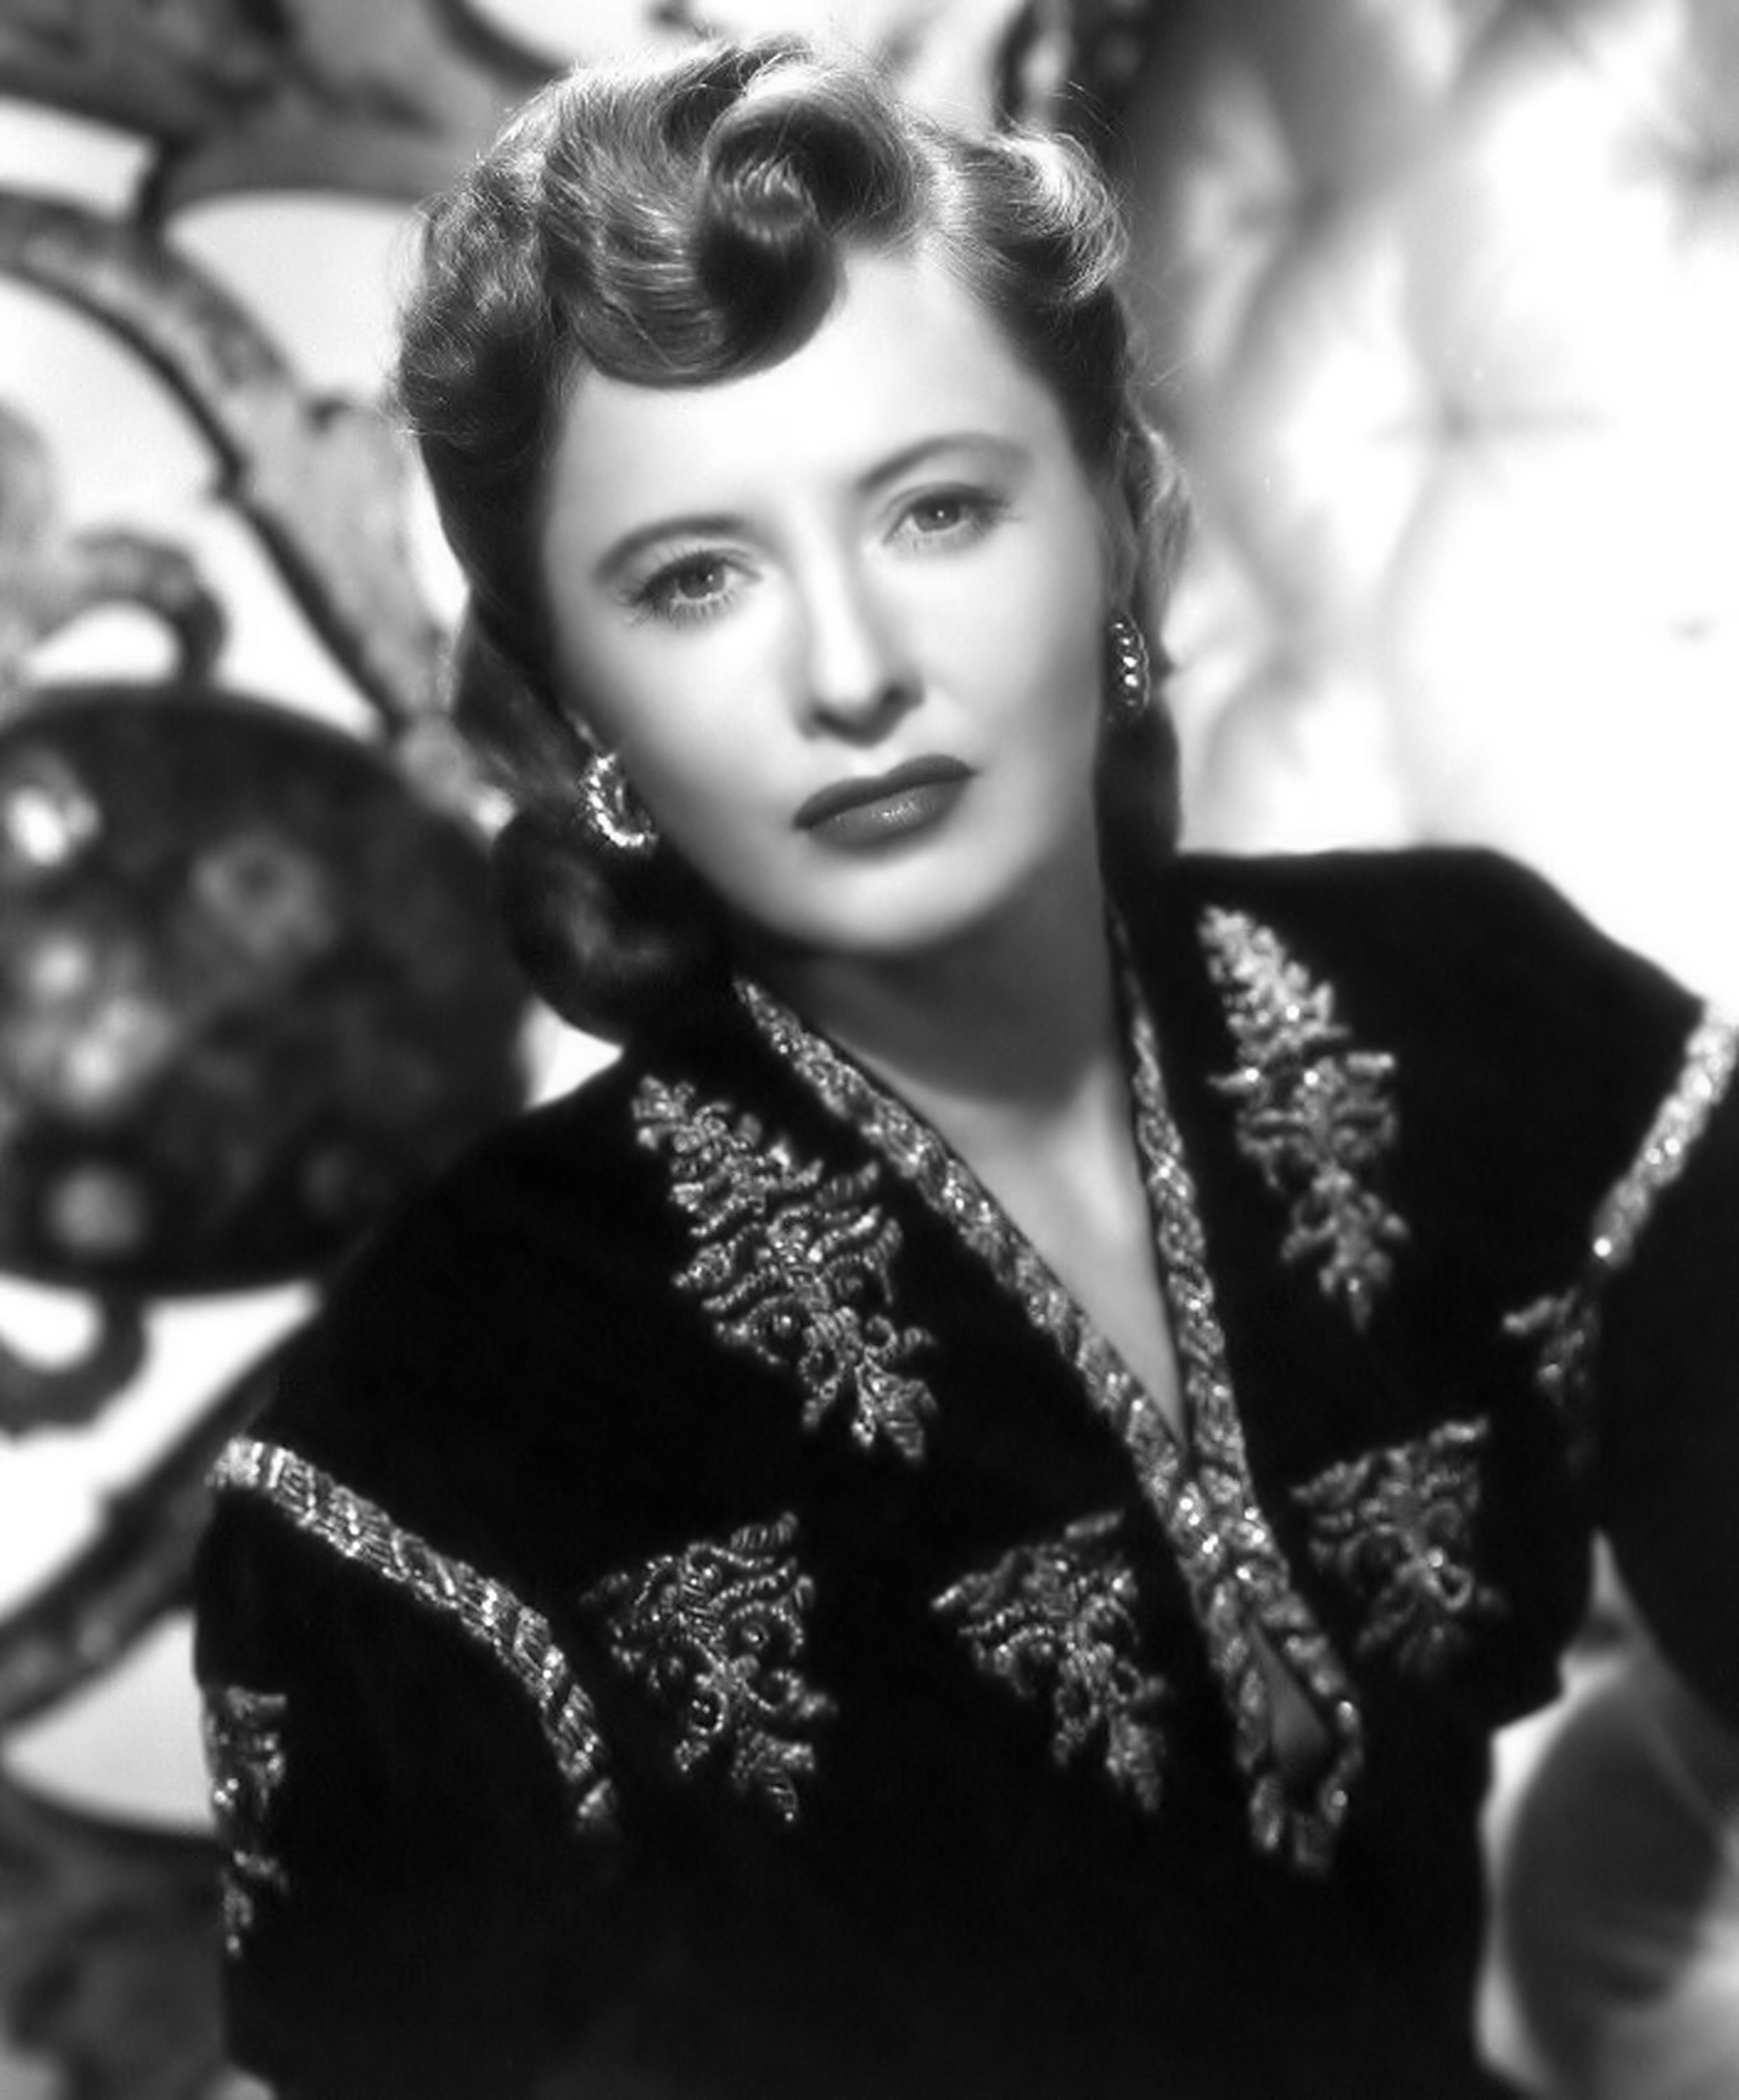 Barbara Stanwyck is pictured in a scene from the movie "The Strange Love of Martha Ivers" | Source: Getty Images